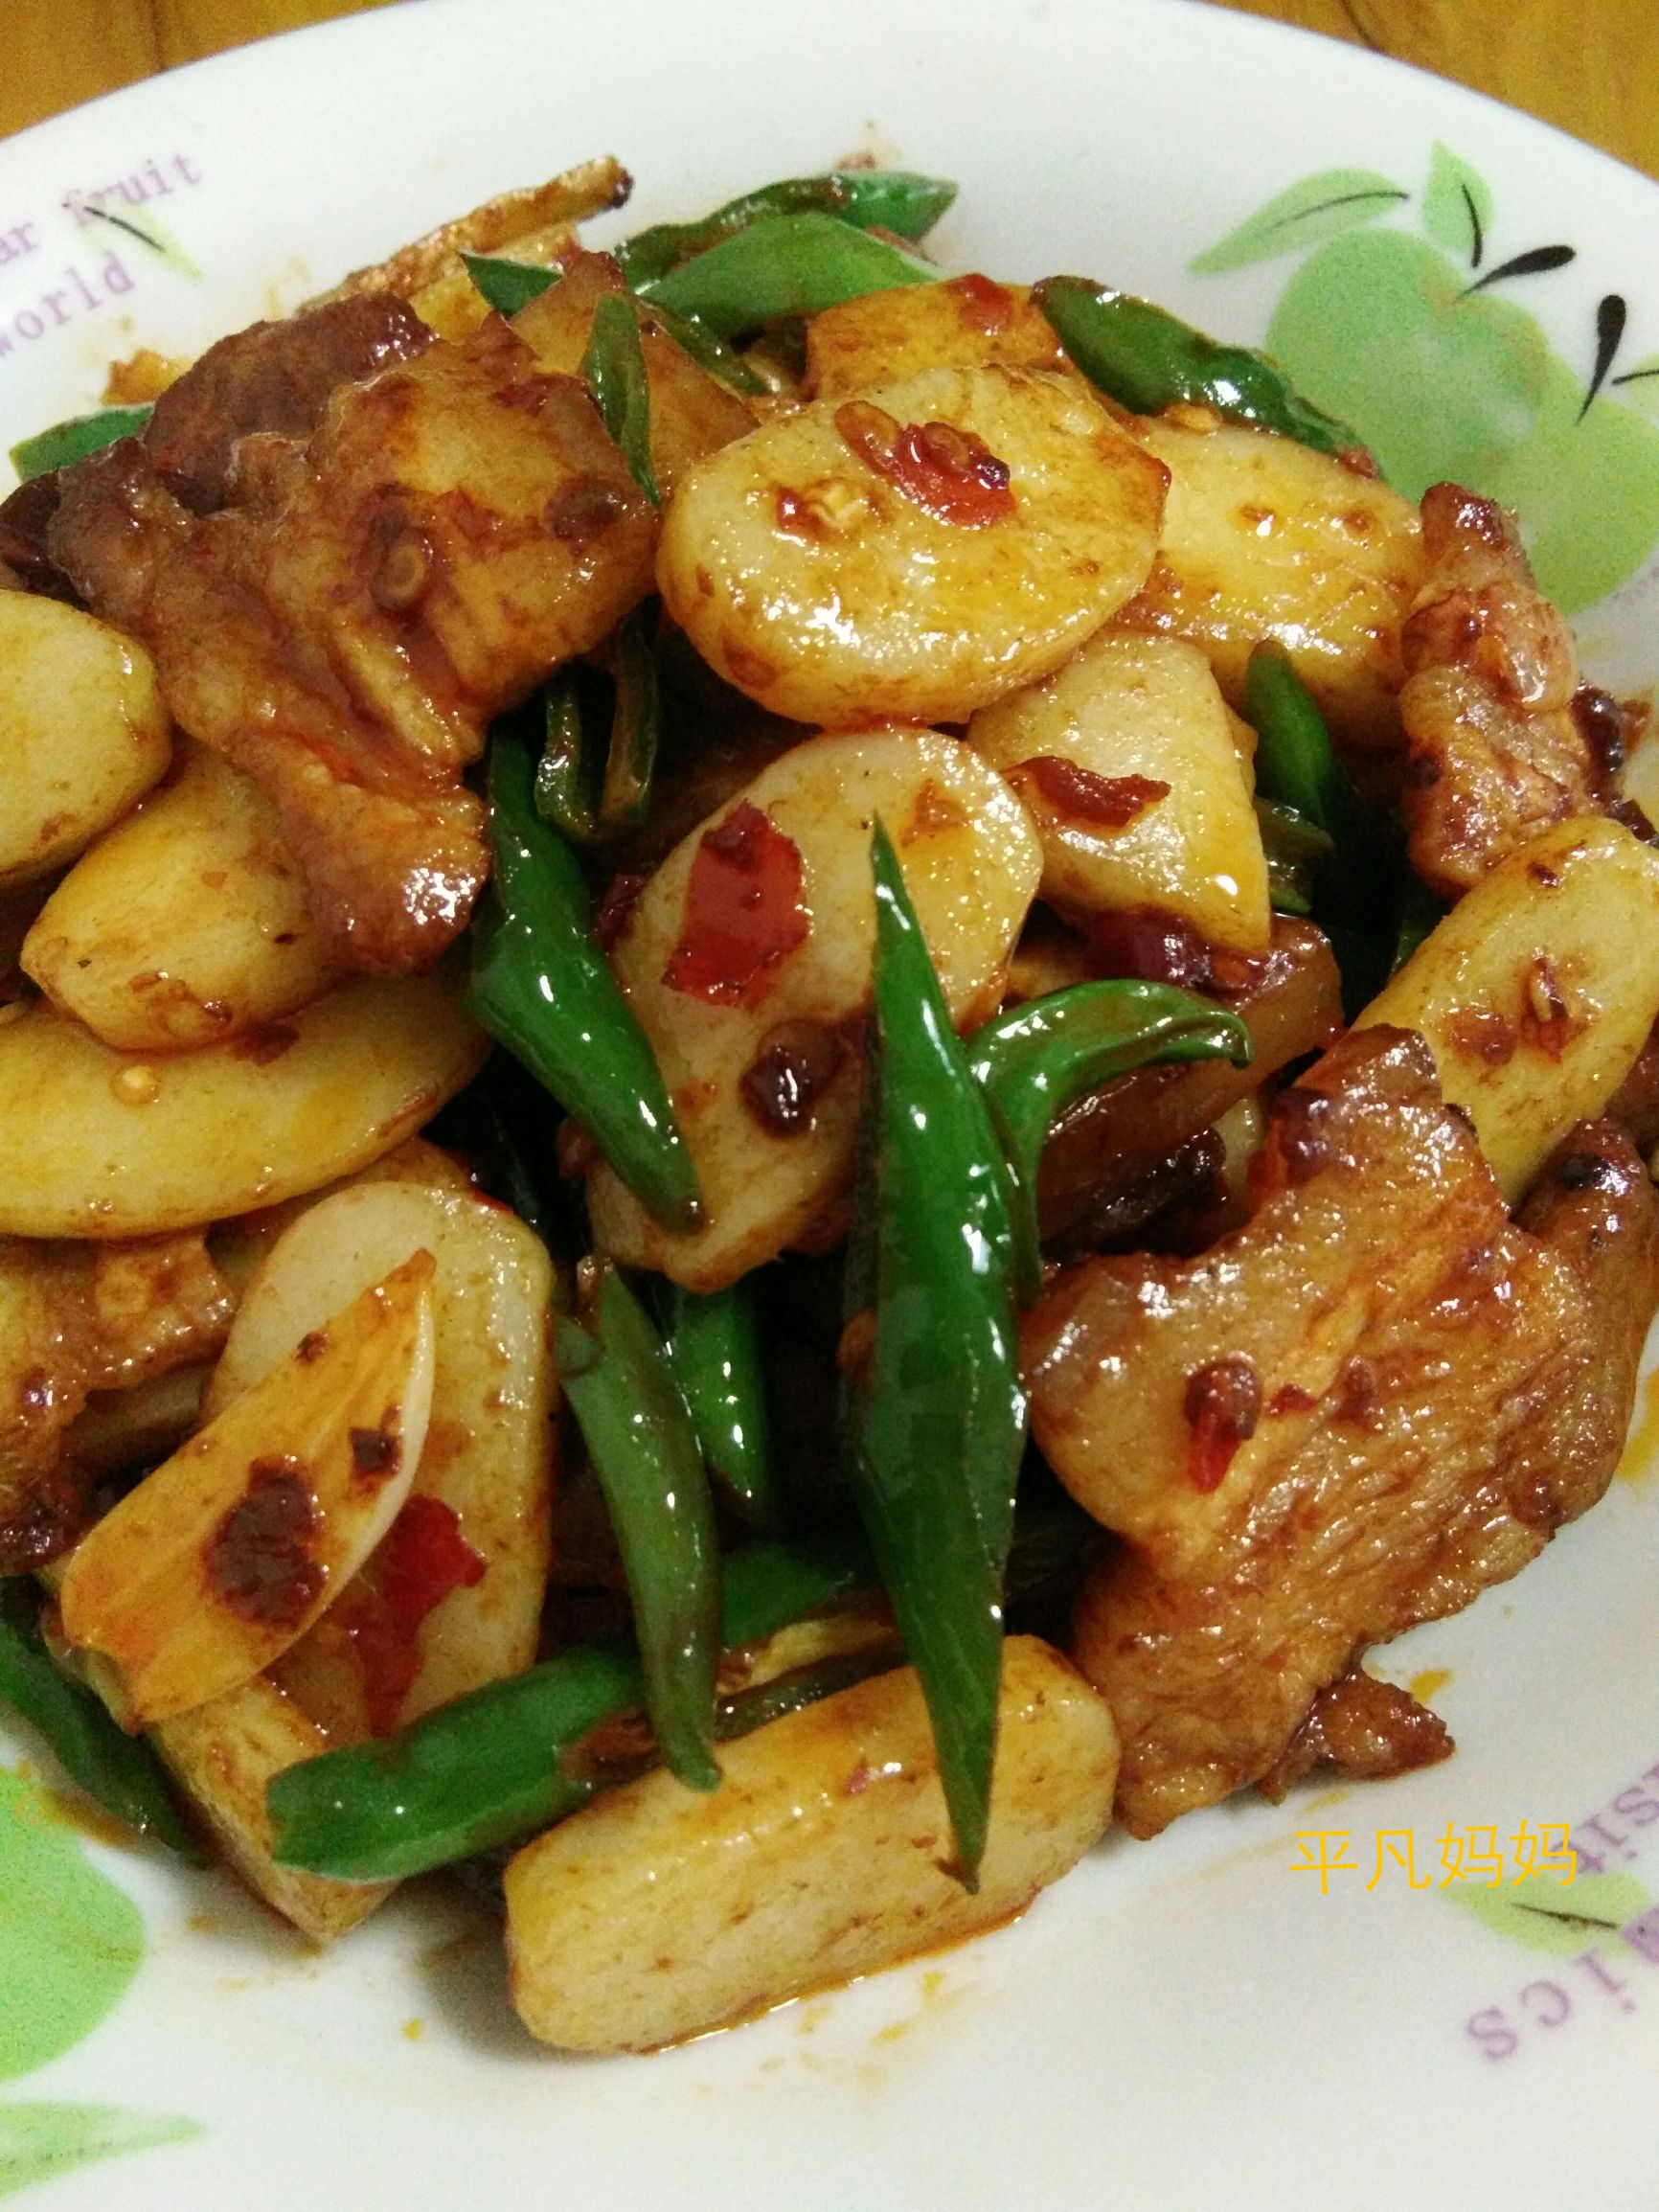 Rice Cake Stir Fried Pork Belly The Collision Of Meat And Rice Cake Delicious Laitimes